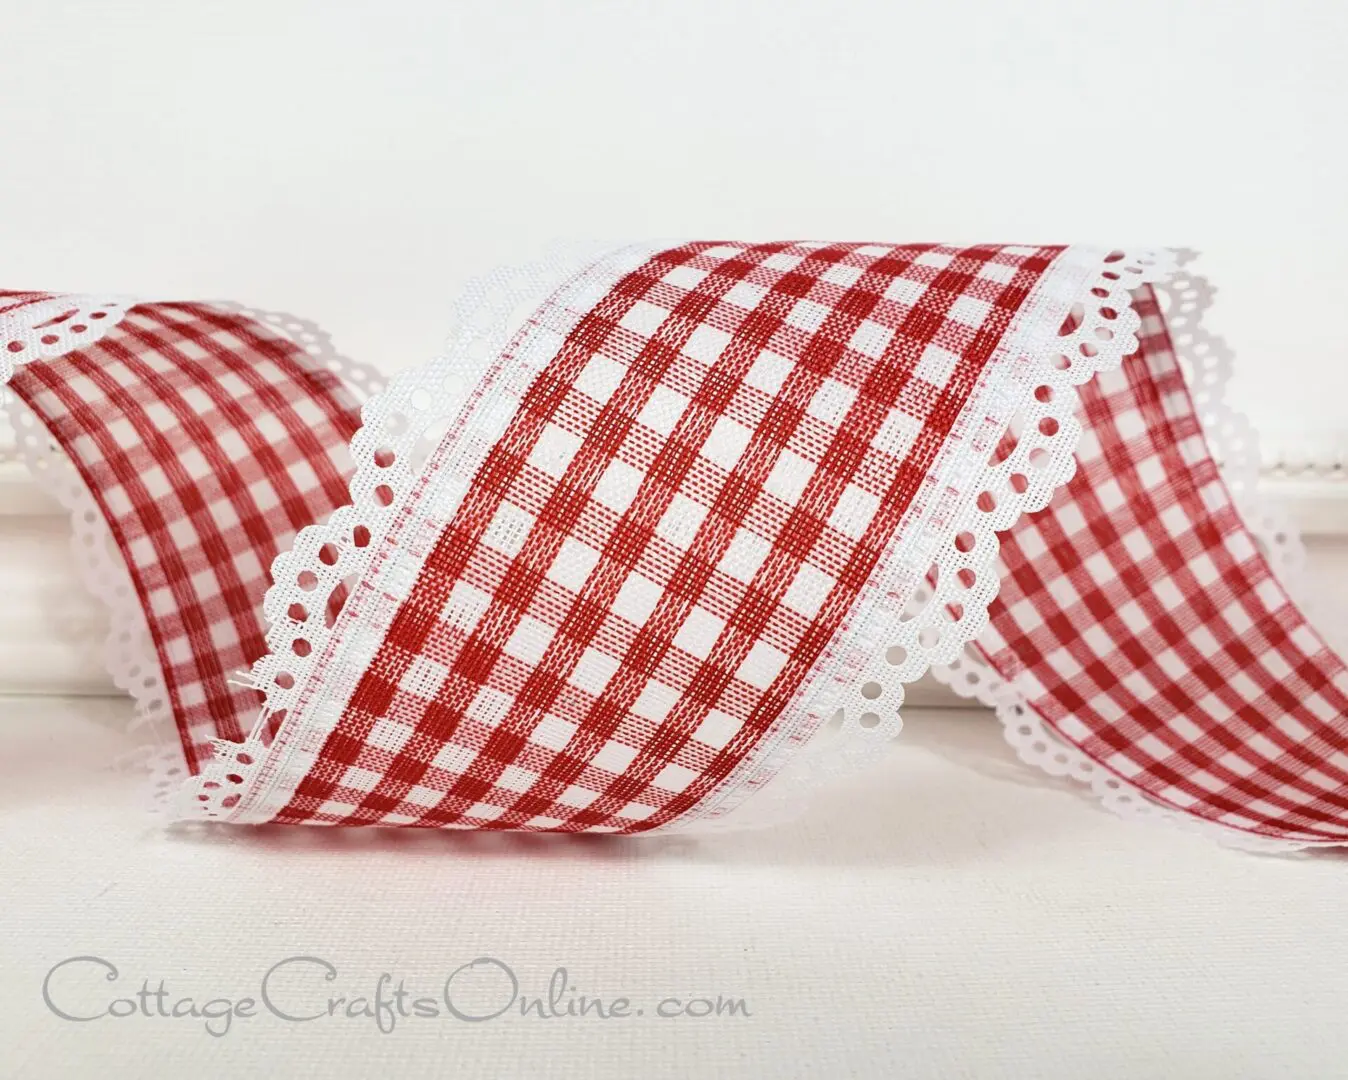 Red white ginham scallop eyelet edge 2.5" wide wired ribbon from the Etsy shop of Cottage Crafts Online.